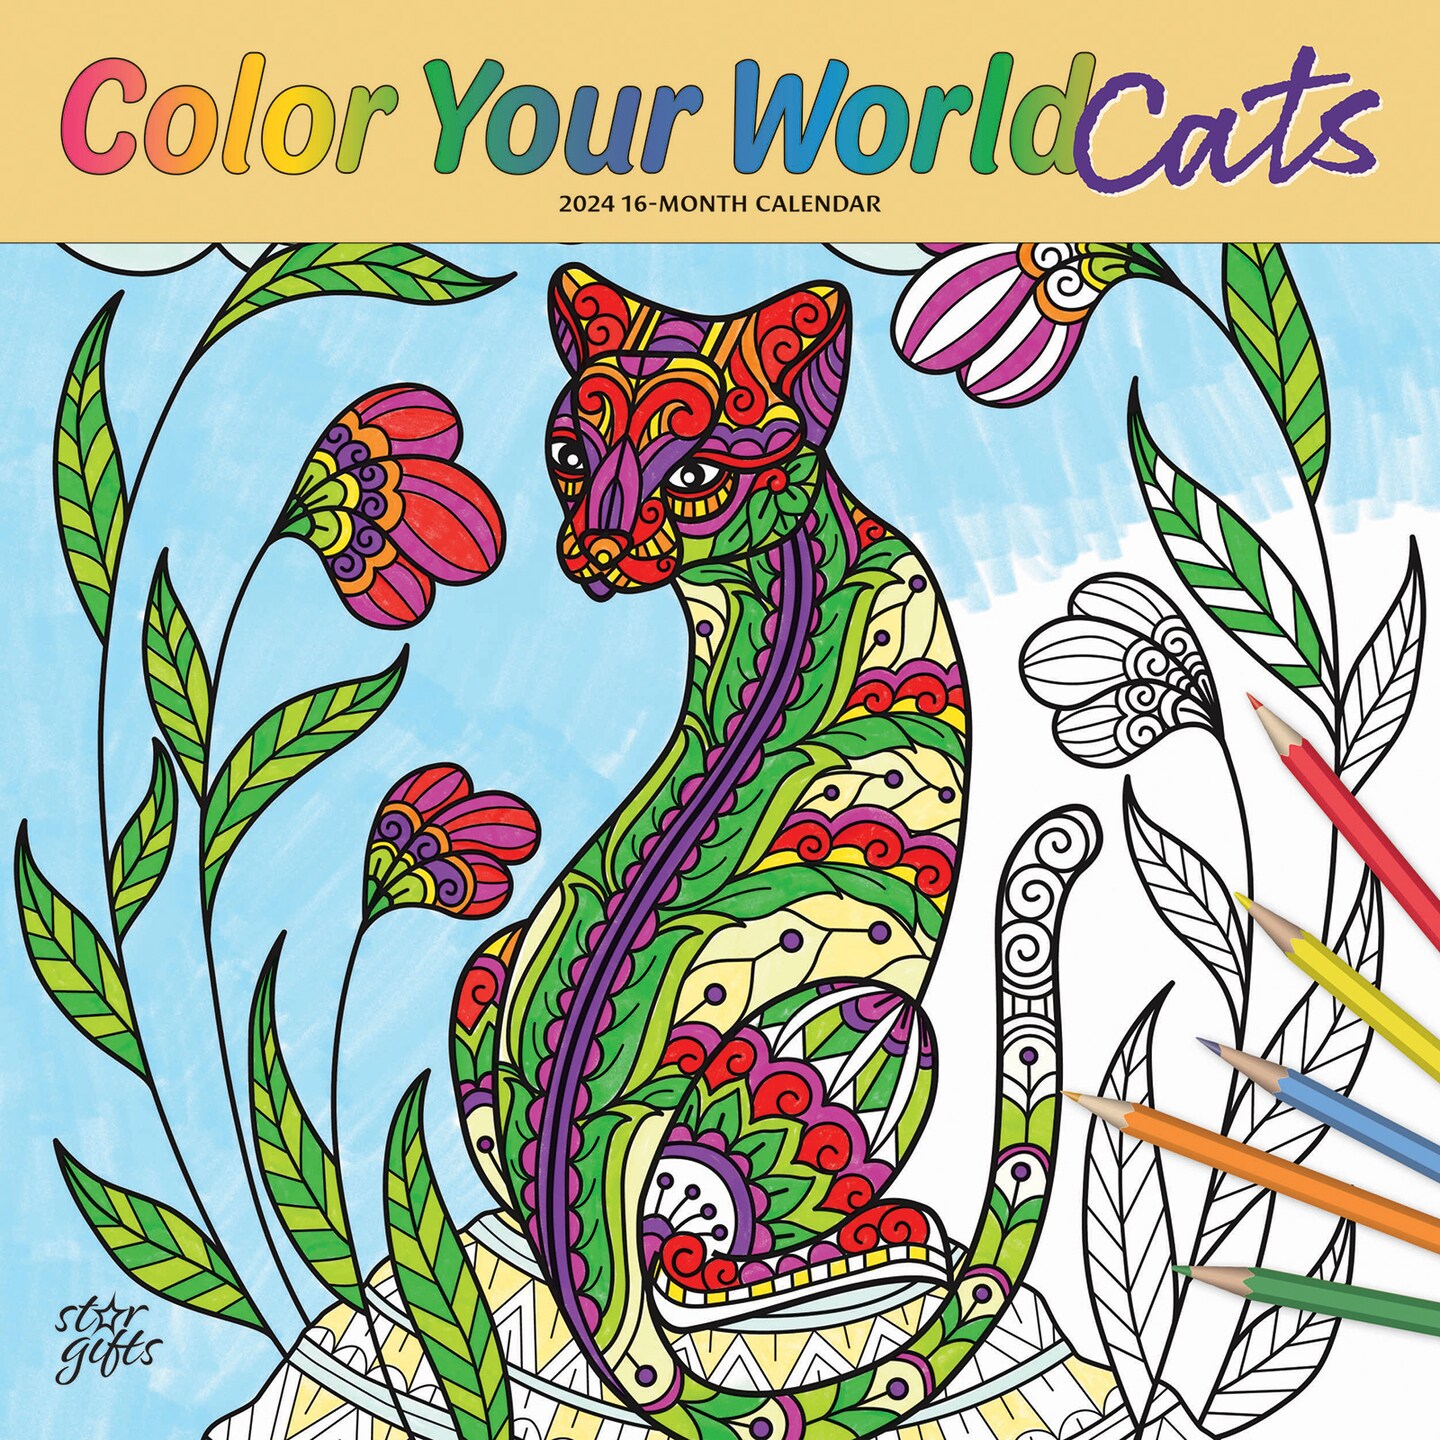 Are Sticker Books the New Adult Coloring? We Tried the Trend